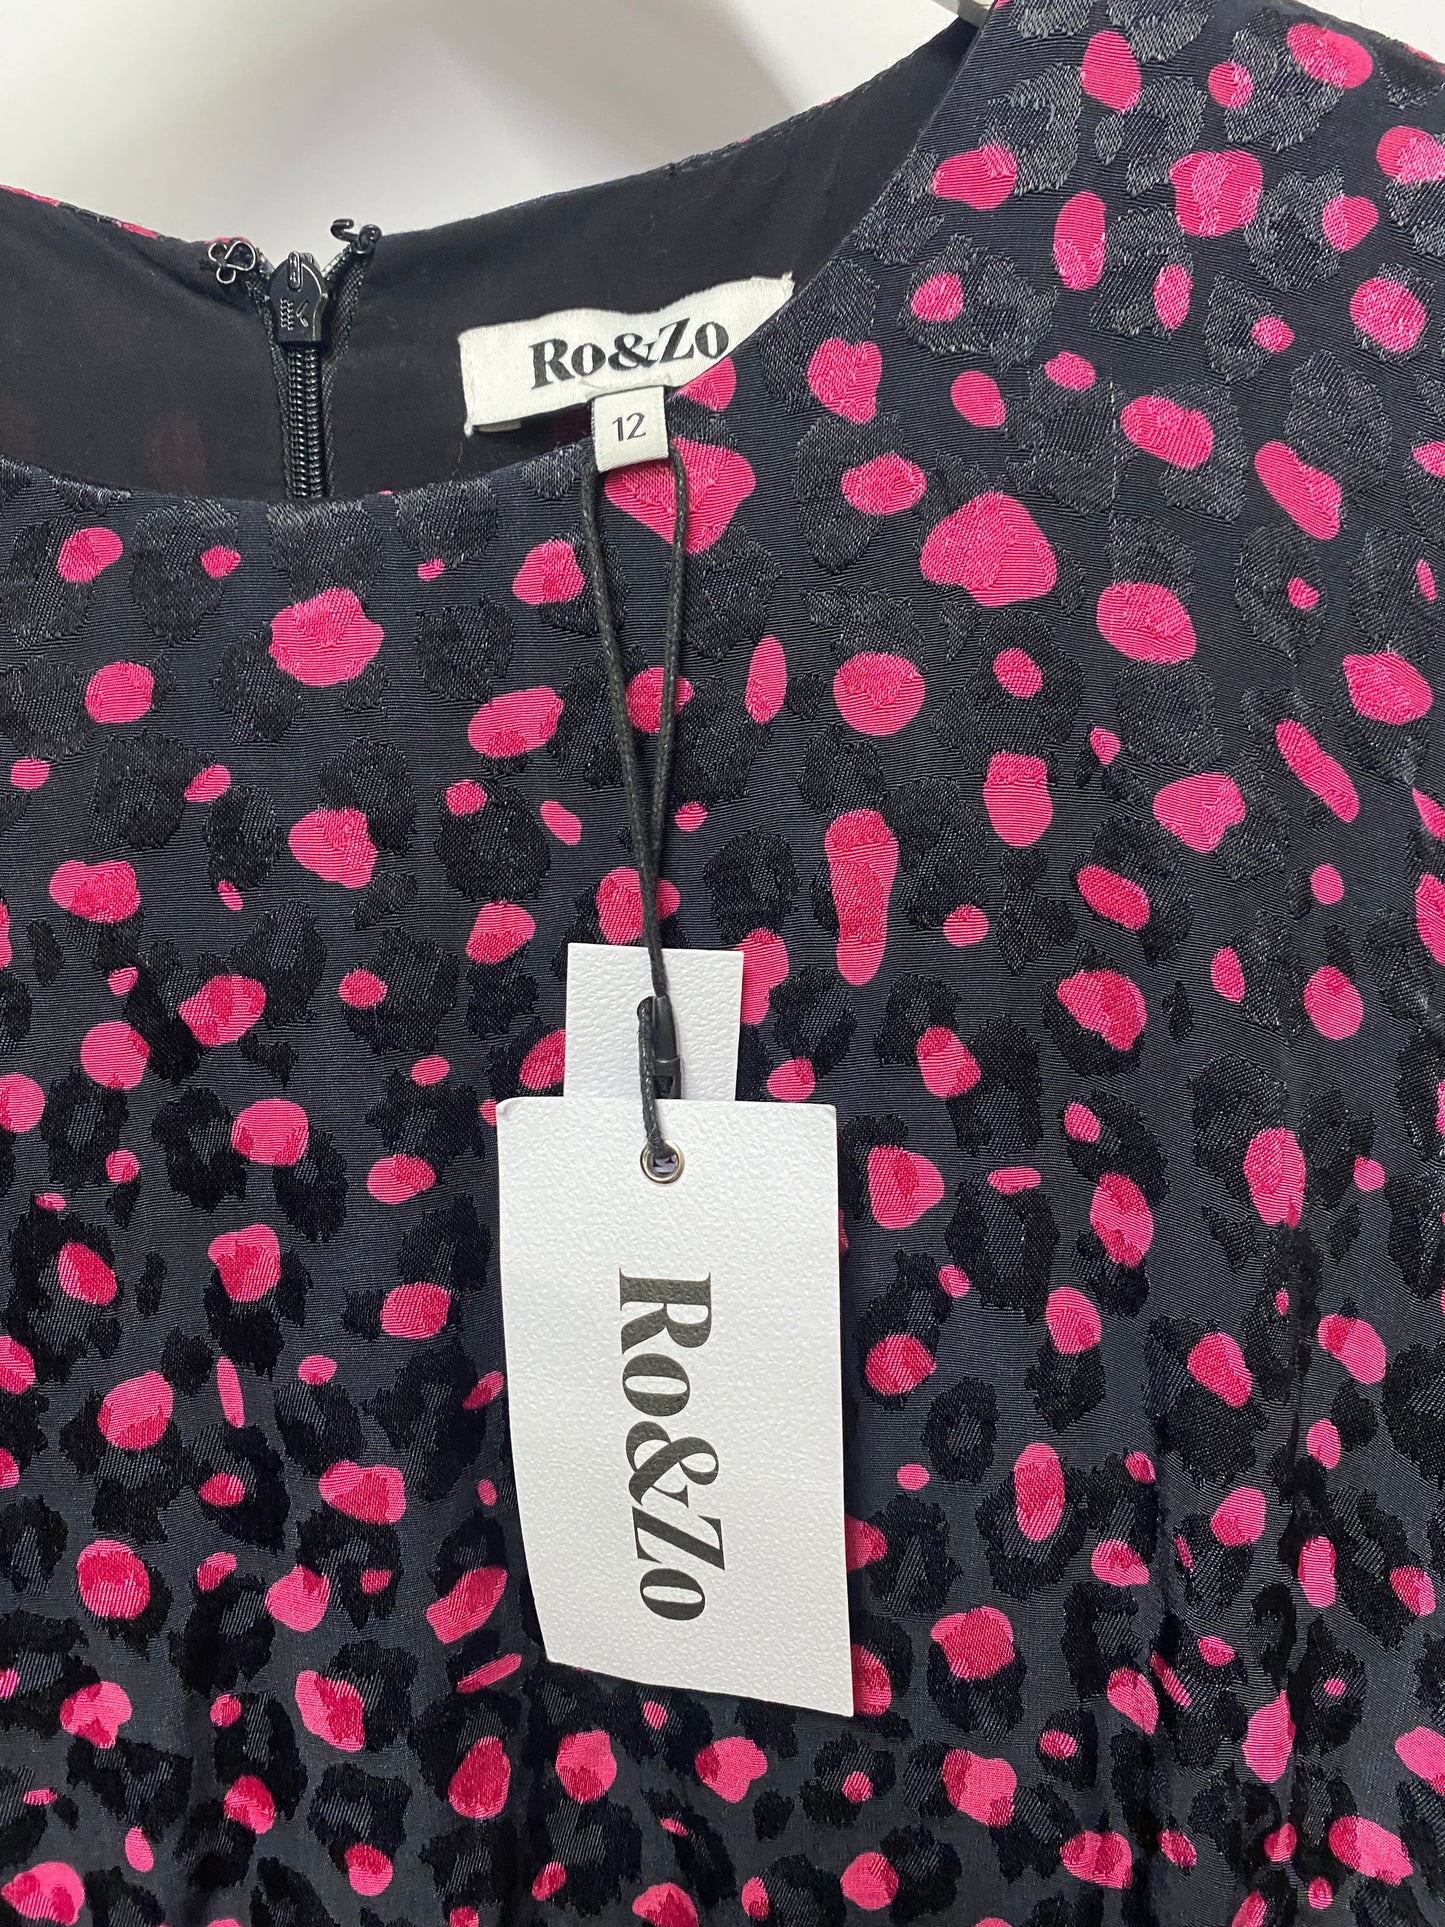 Ro&Zo Black and Pink Felicity Spot Occasion Dress 12 BNWT